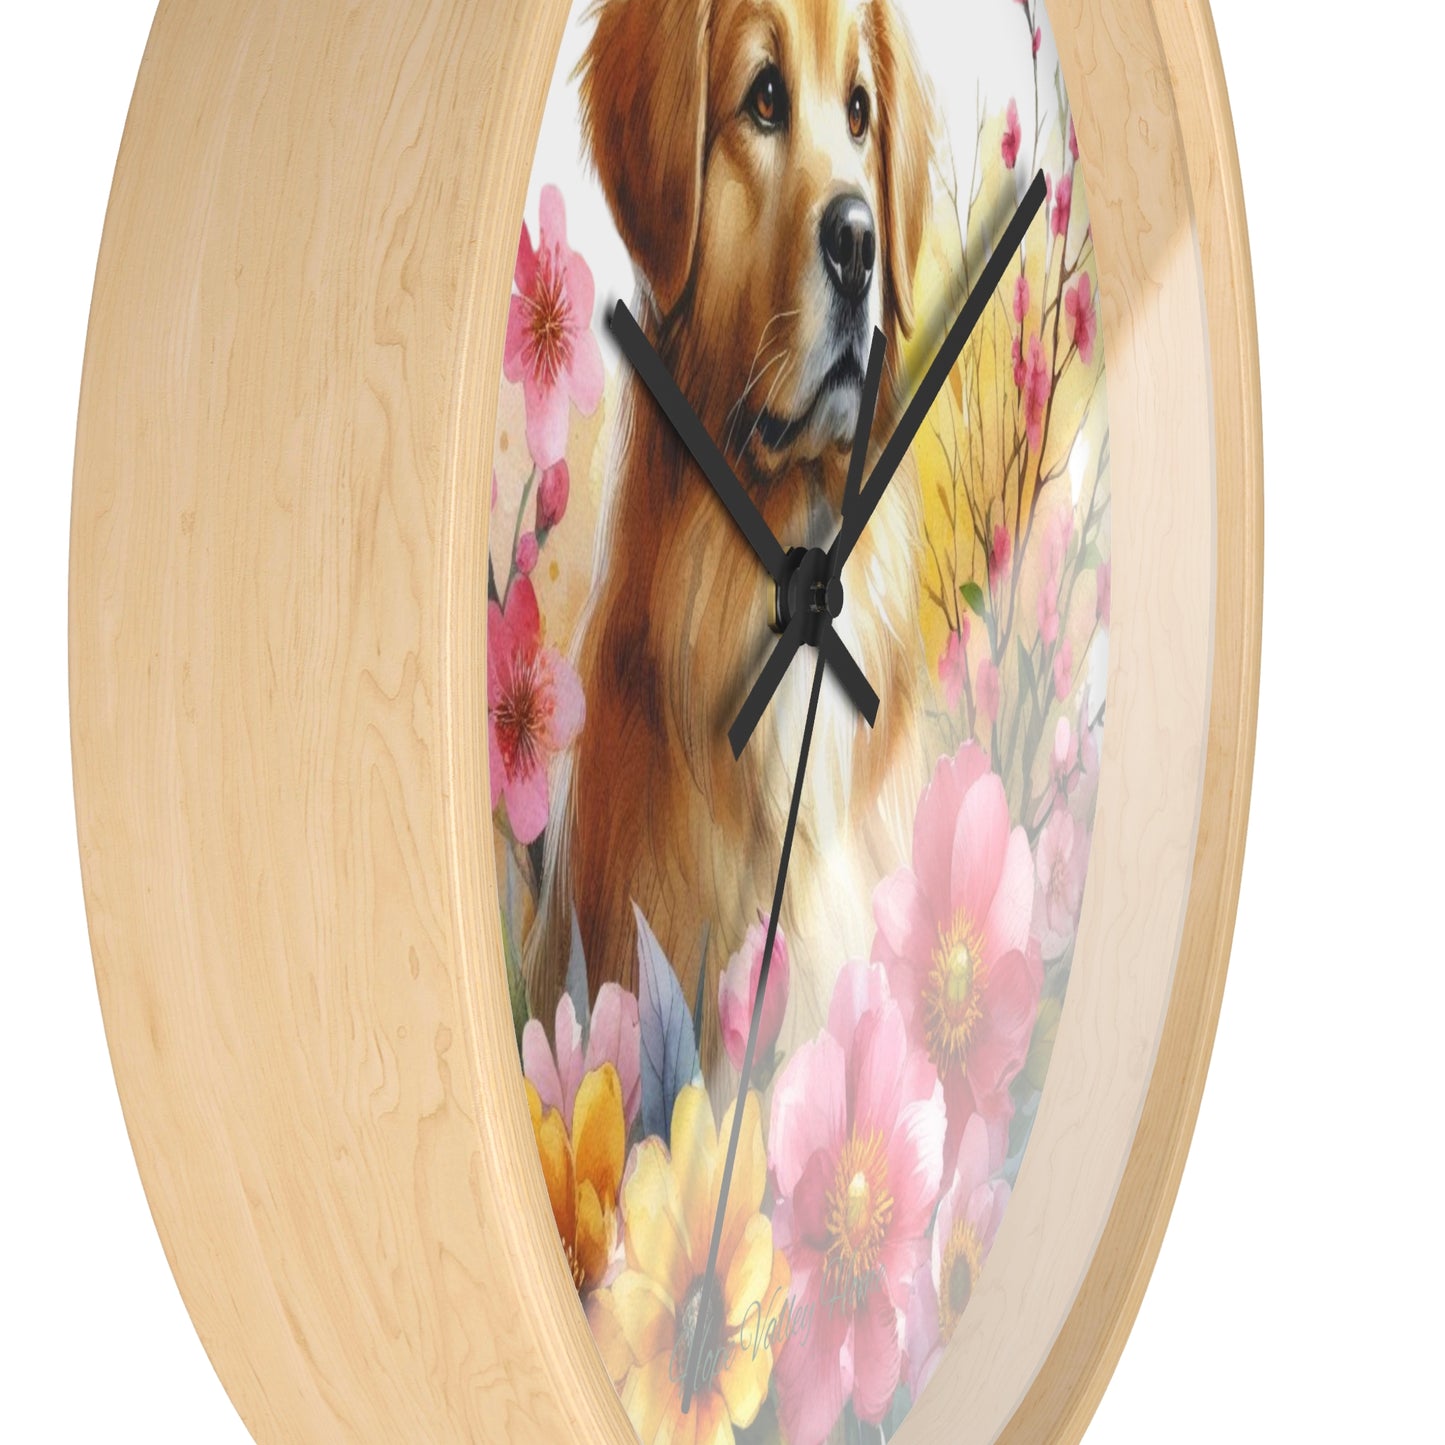 Golden Retriever Wall Clock | Wall Art and Giftware by Hope Valley Home